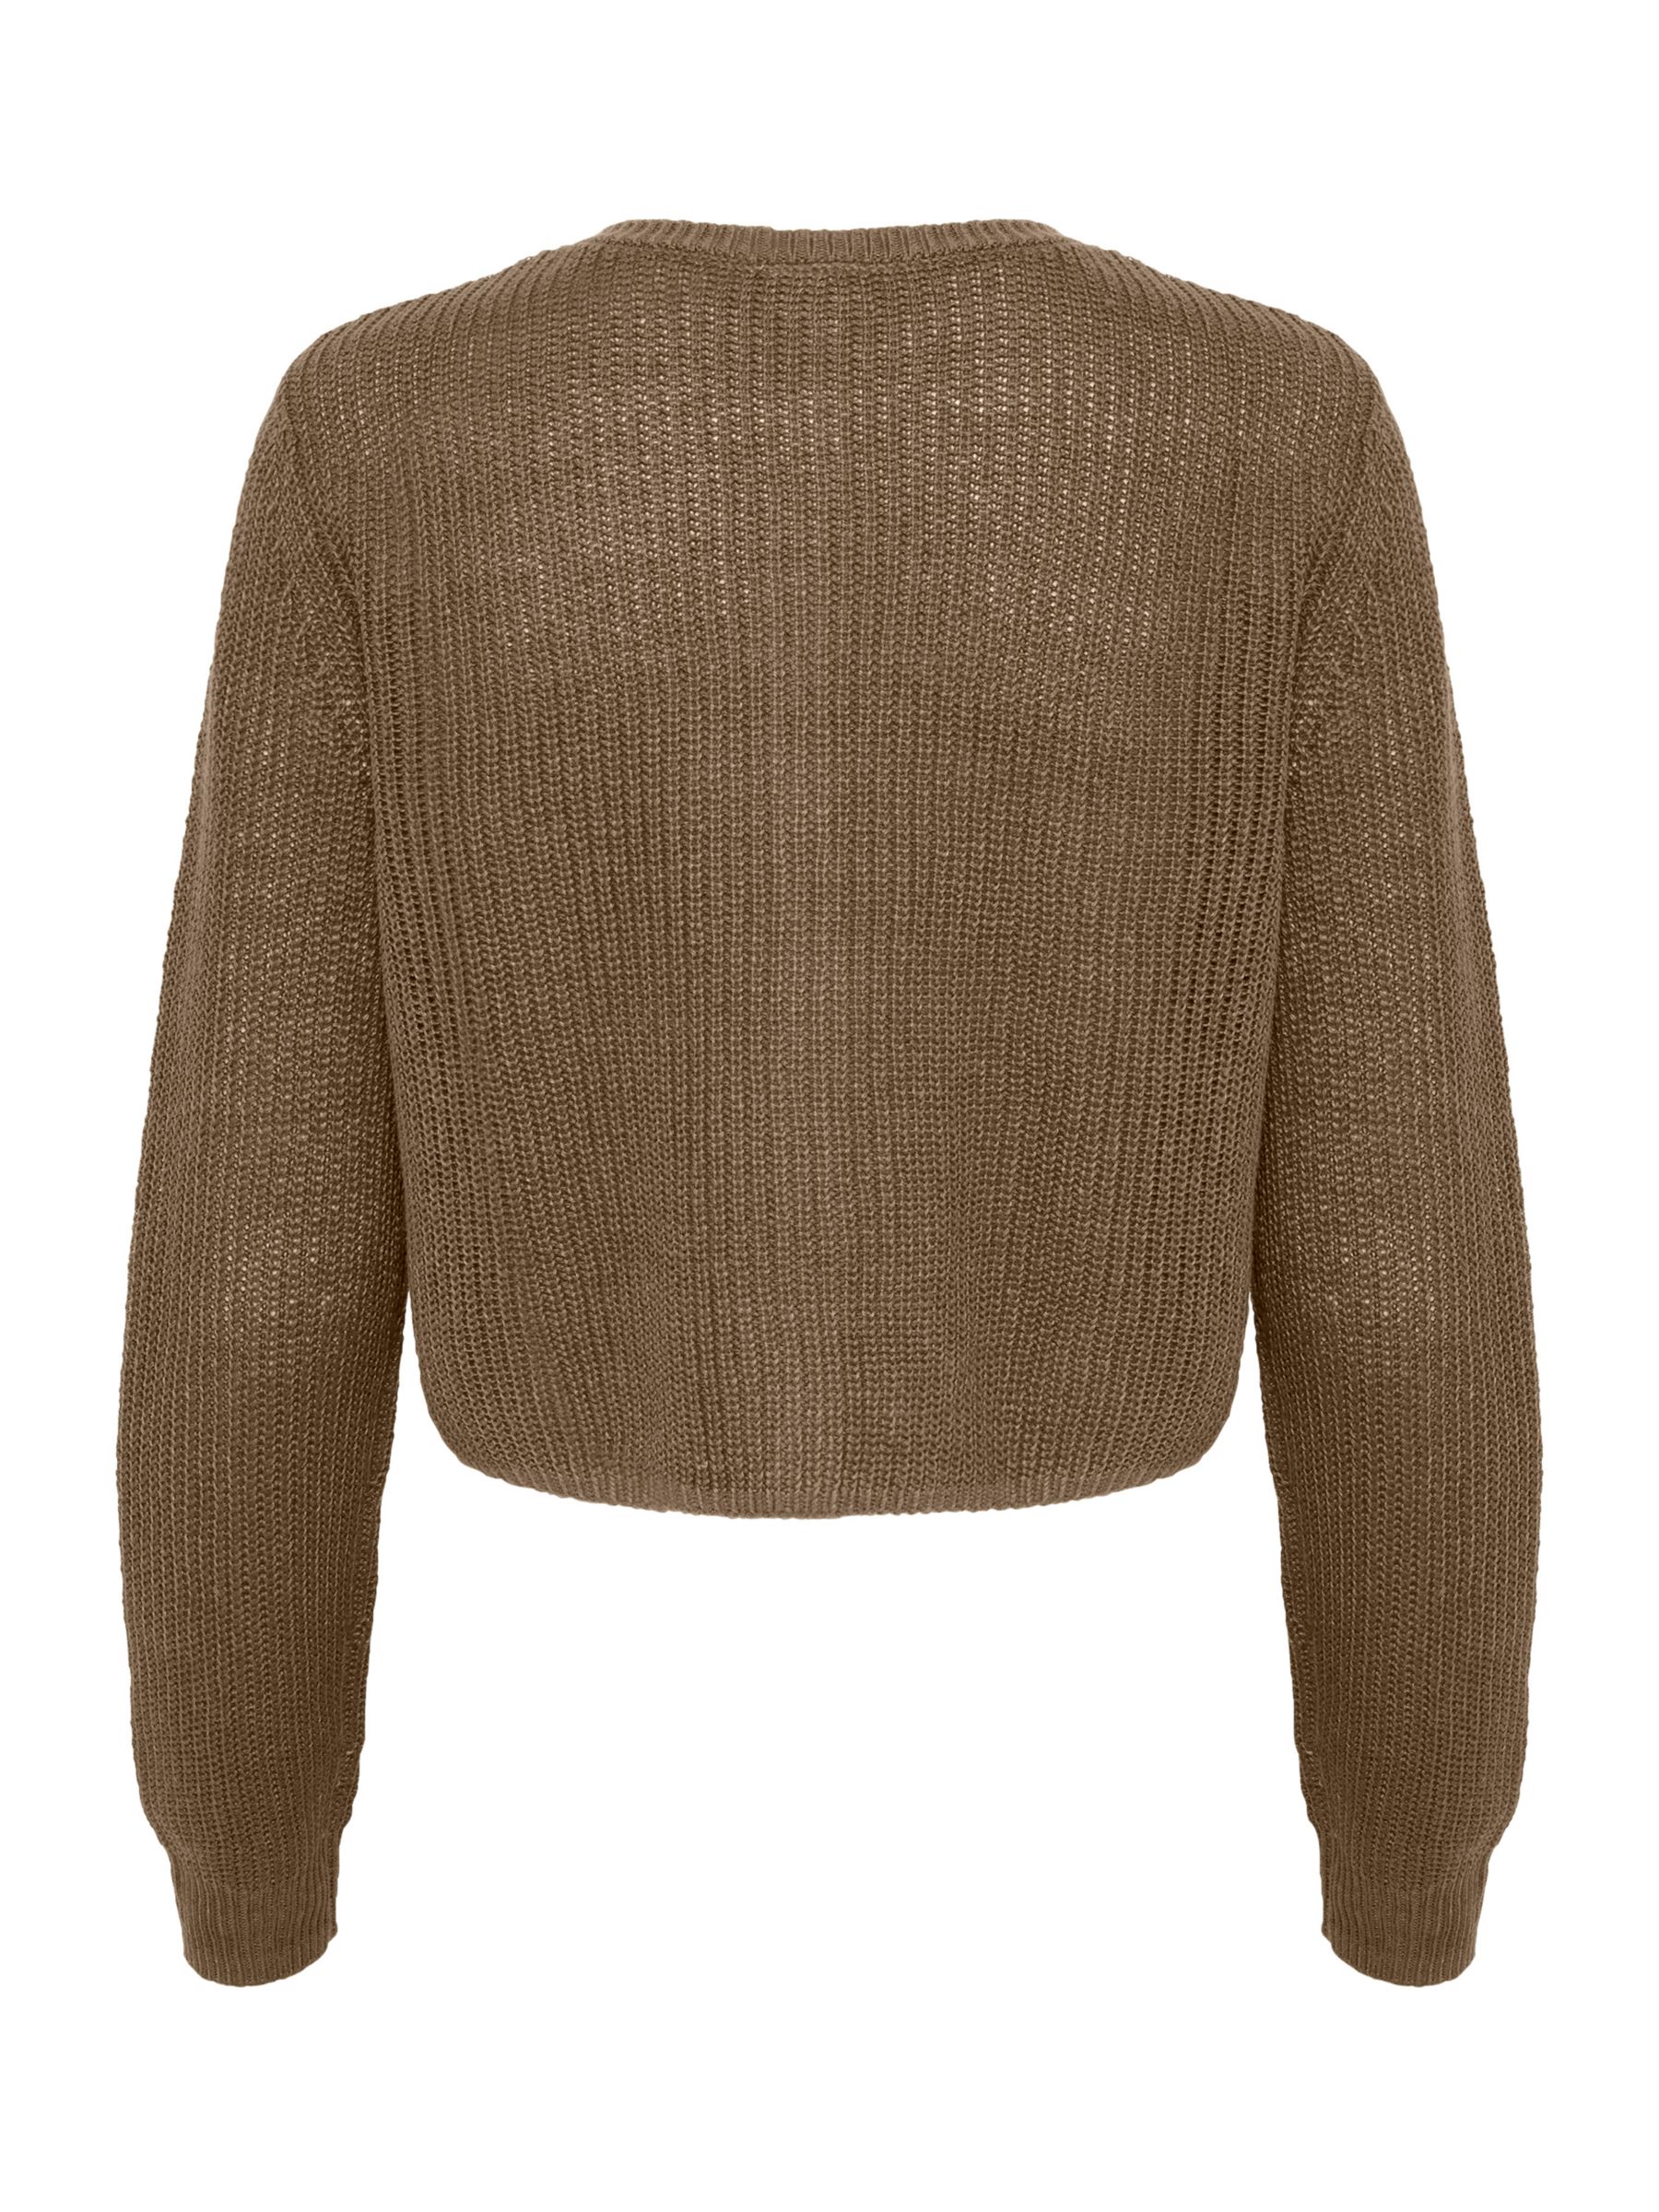 Buy Part Two Gigia Cropped Round Neck Cardigan, Canteen Online at johnlewis.com